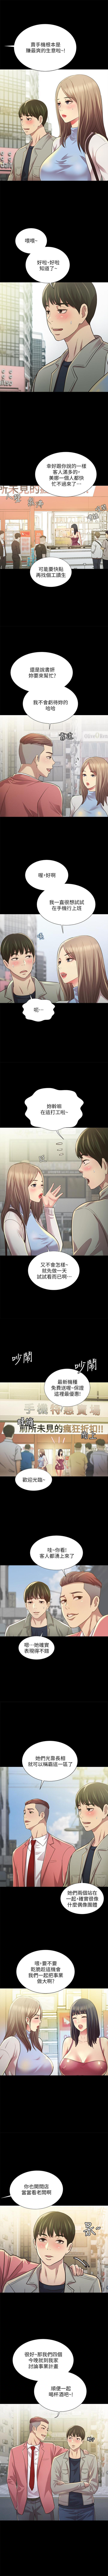 Teensex 朋友, 女朋友 1-96 Officesex - Page 622